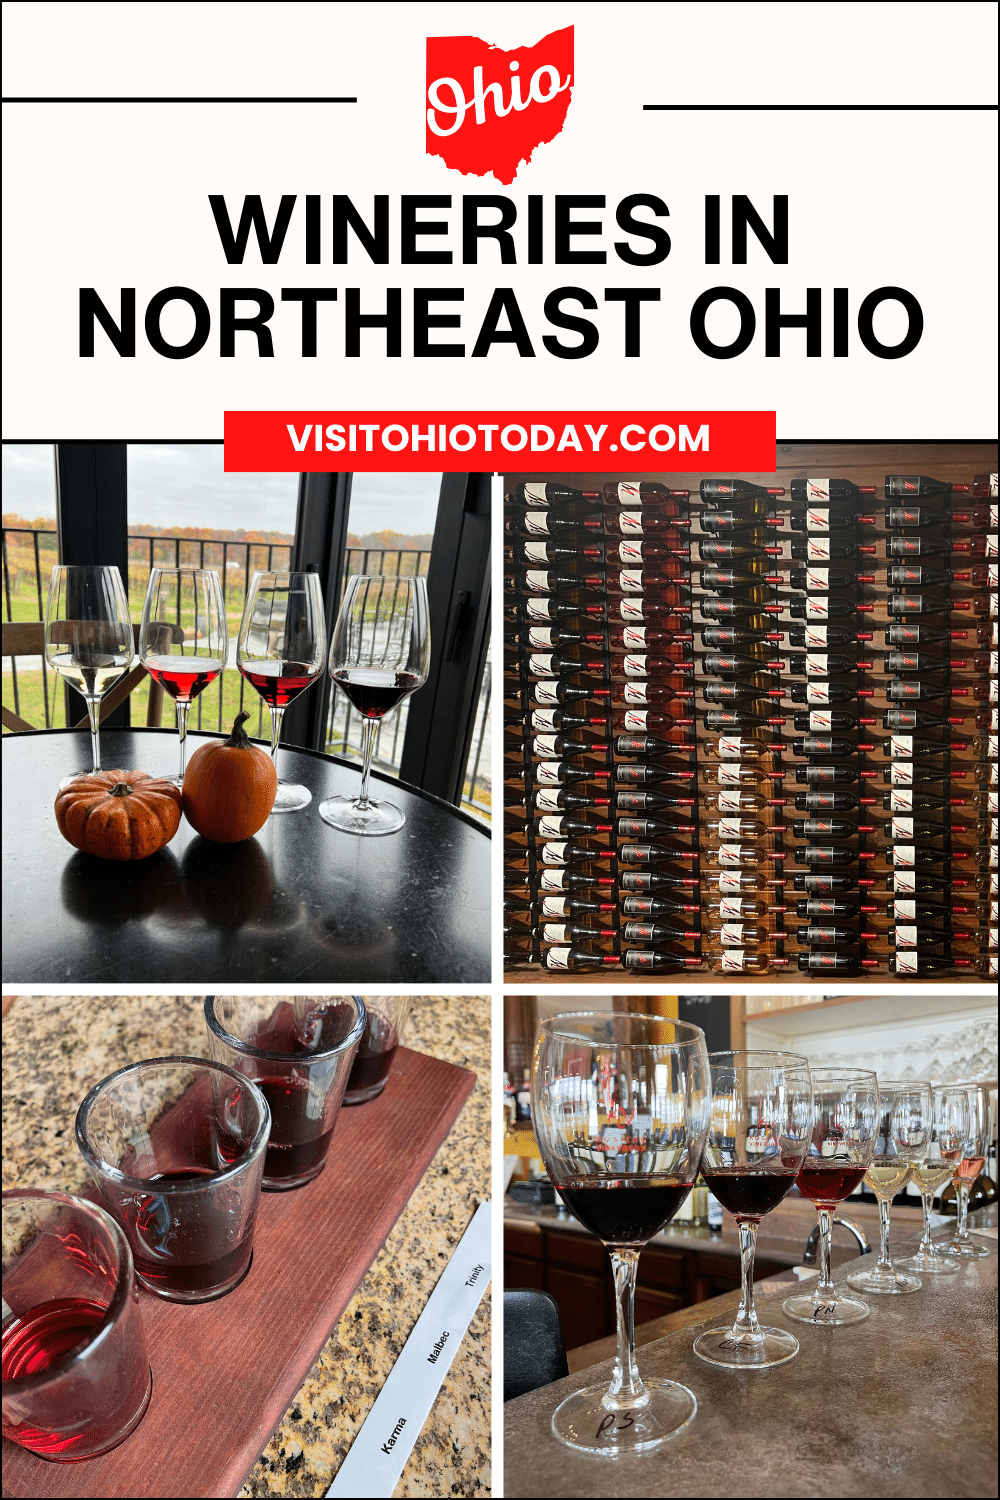 vertical image with 4 photos of wine from various wineries in Northeast Ohio. Photo credits: Cindy Gordon from VisitOhioToday.com